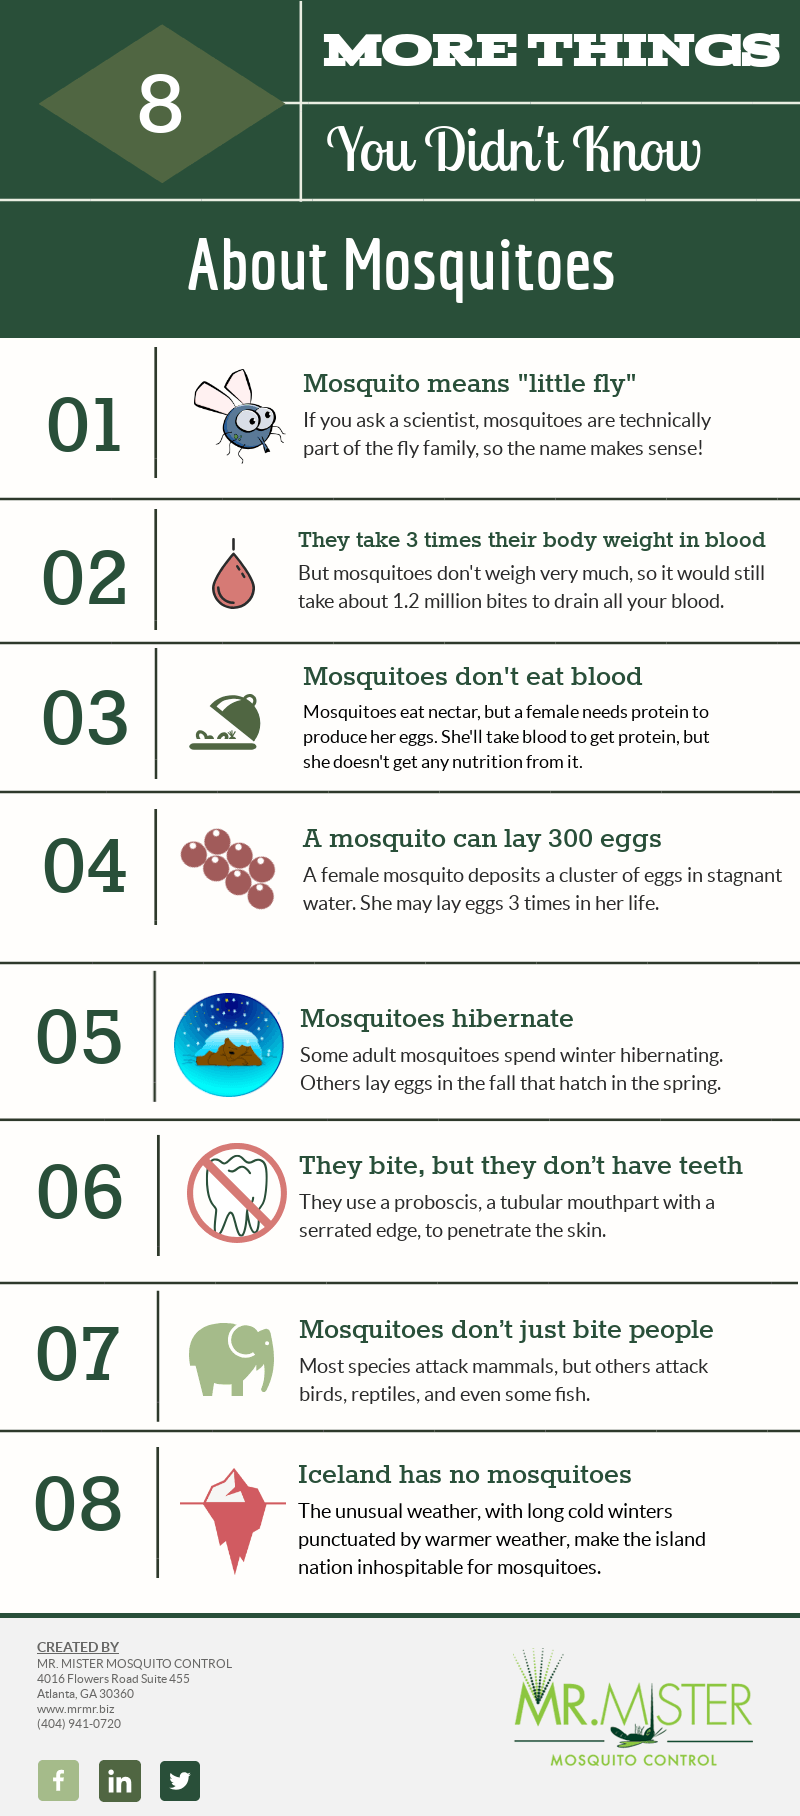 8 More Things You Didn’t Know About Mosquitoes [infographic]